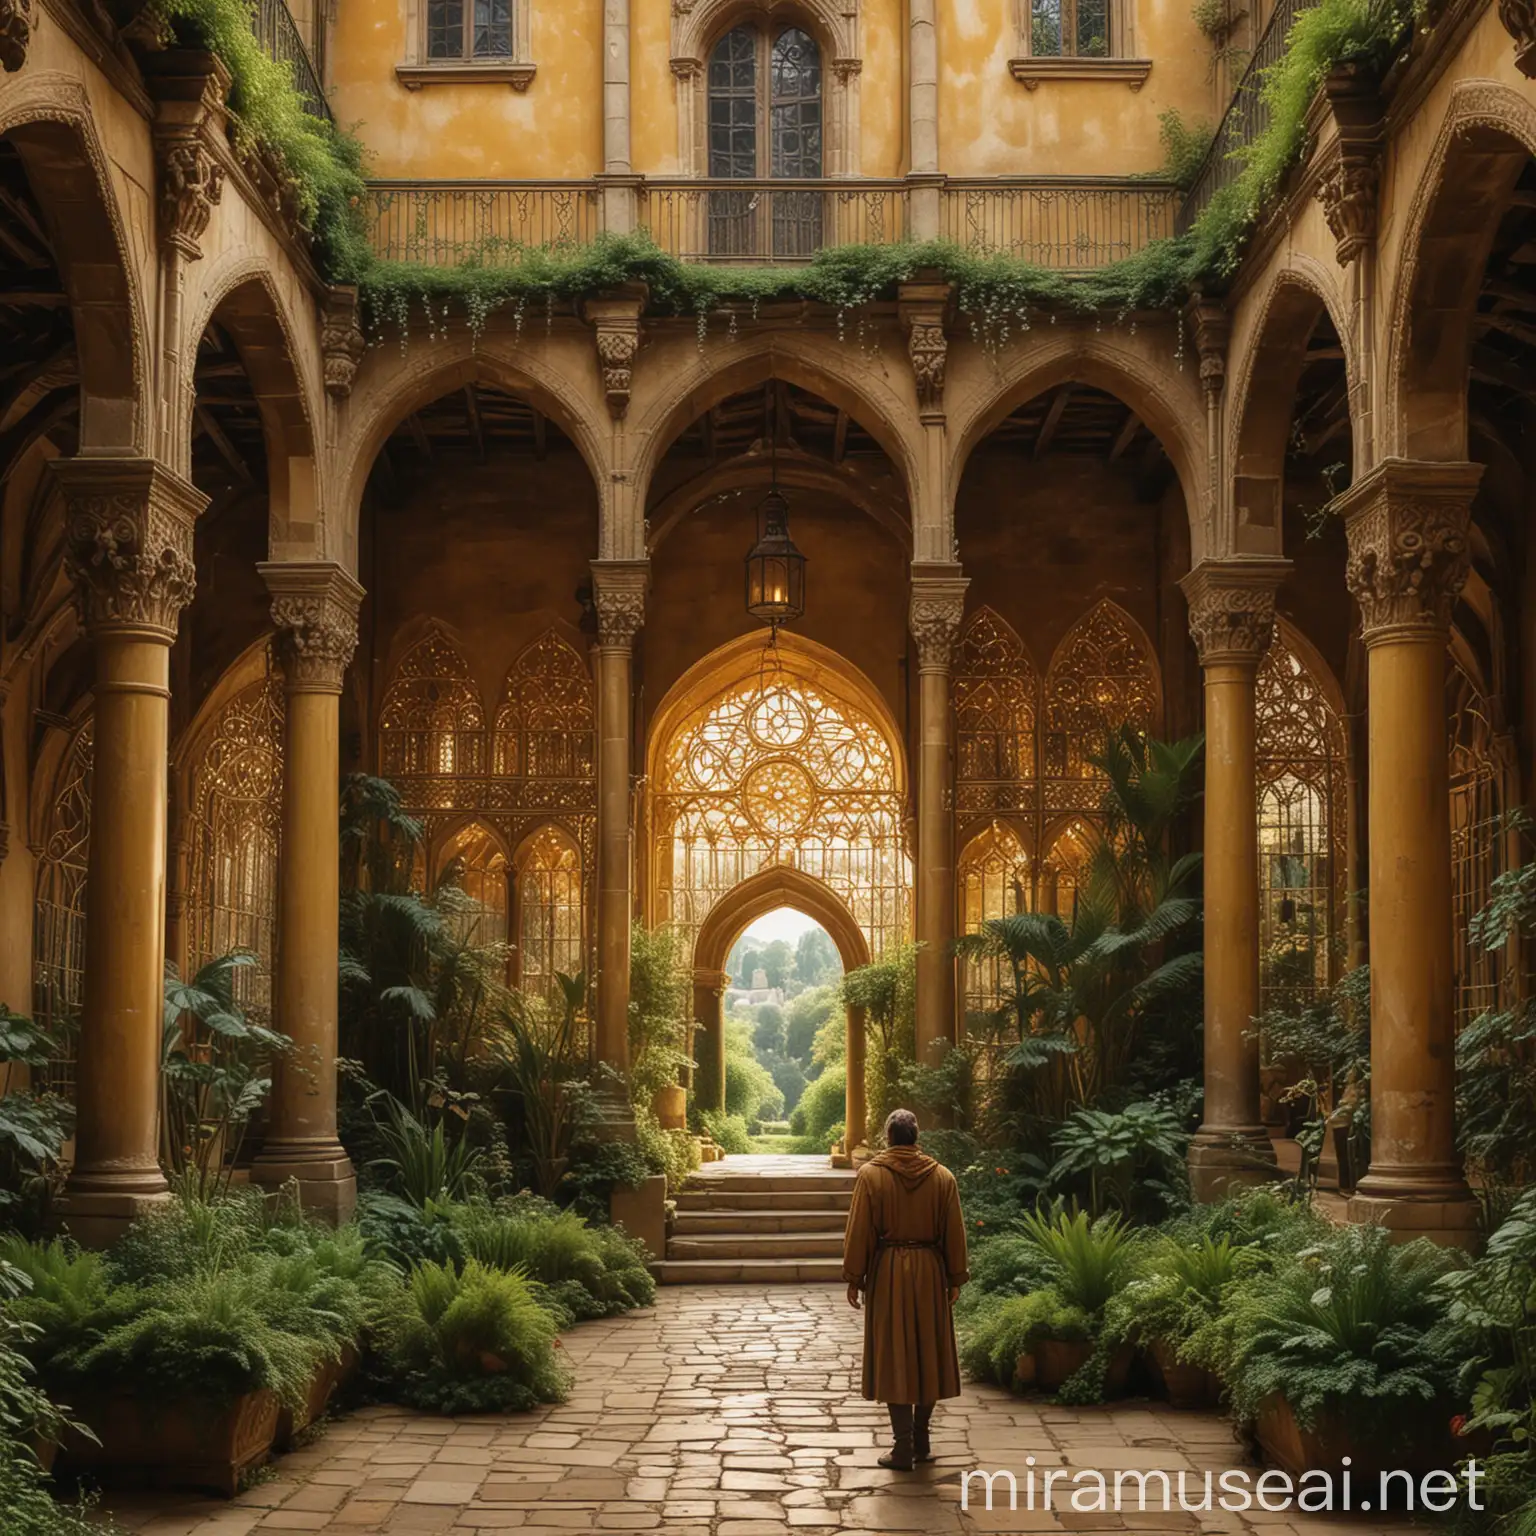 Medieval Man Admiring Golden Palace with Crystal Inlays and Lush Gardens